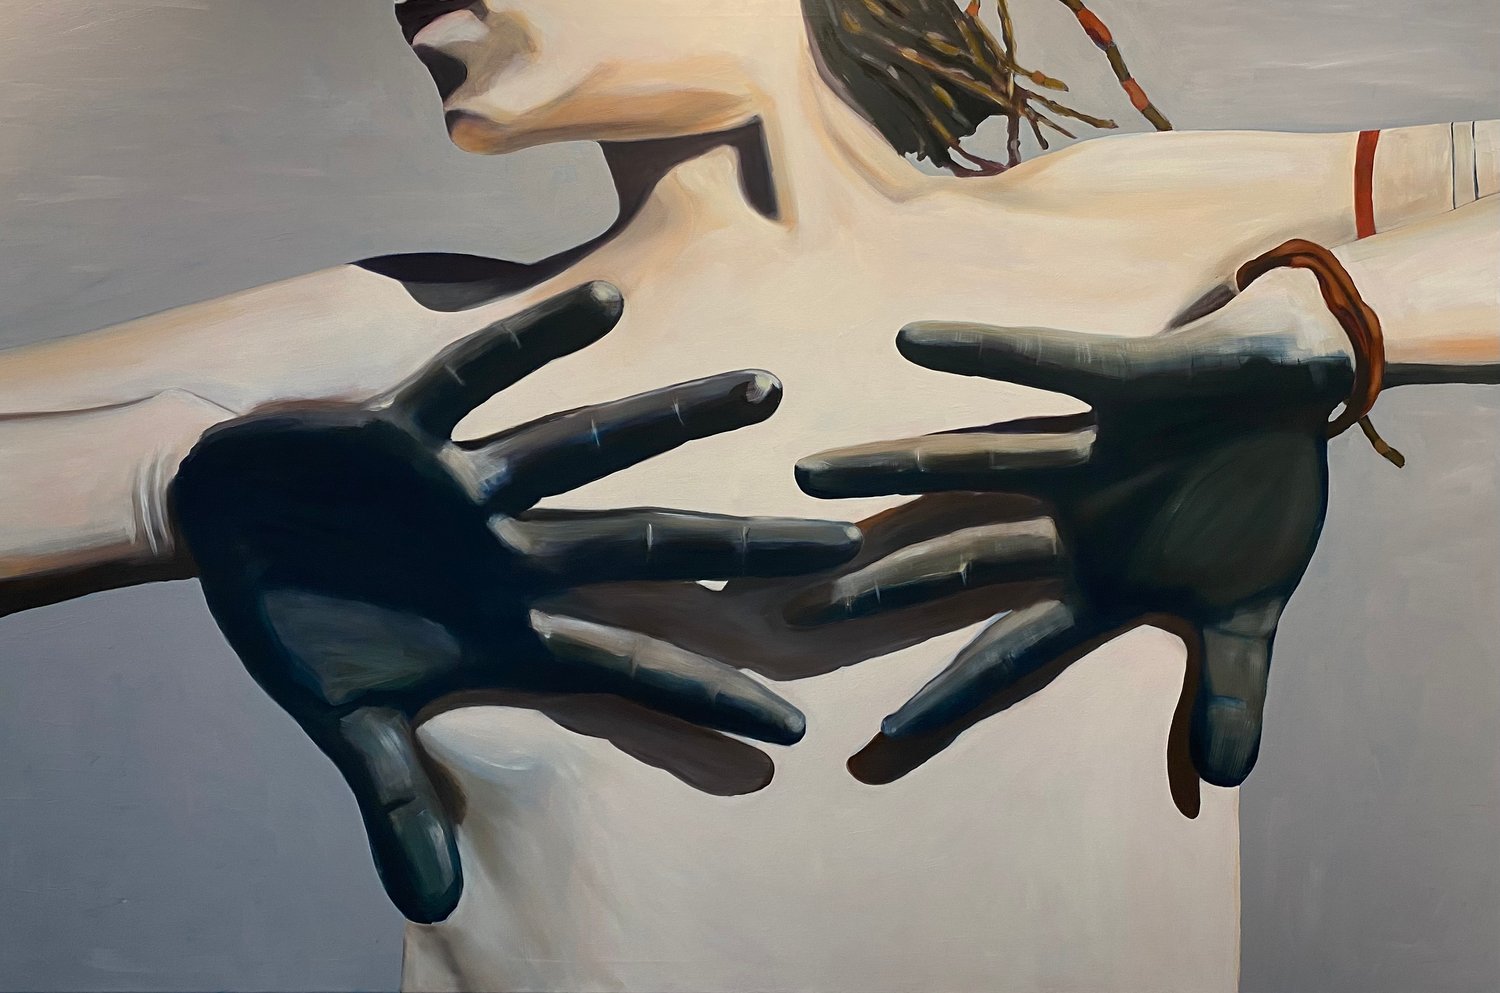 Image of A woman’s hands